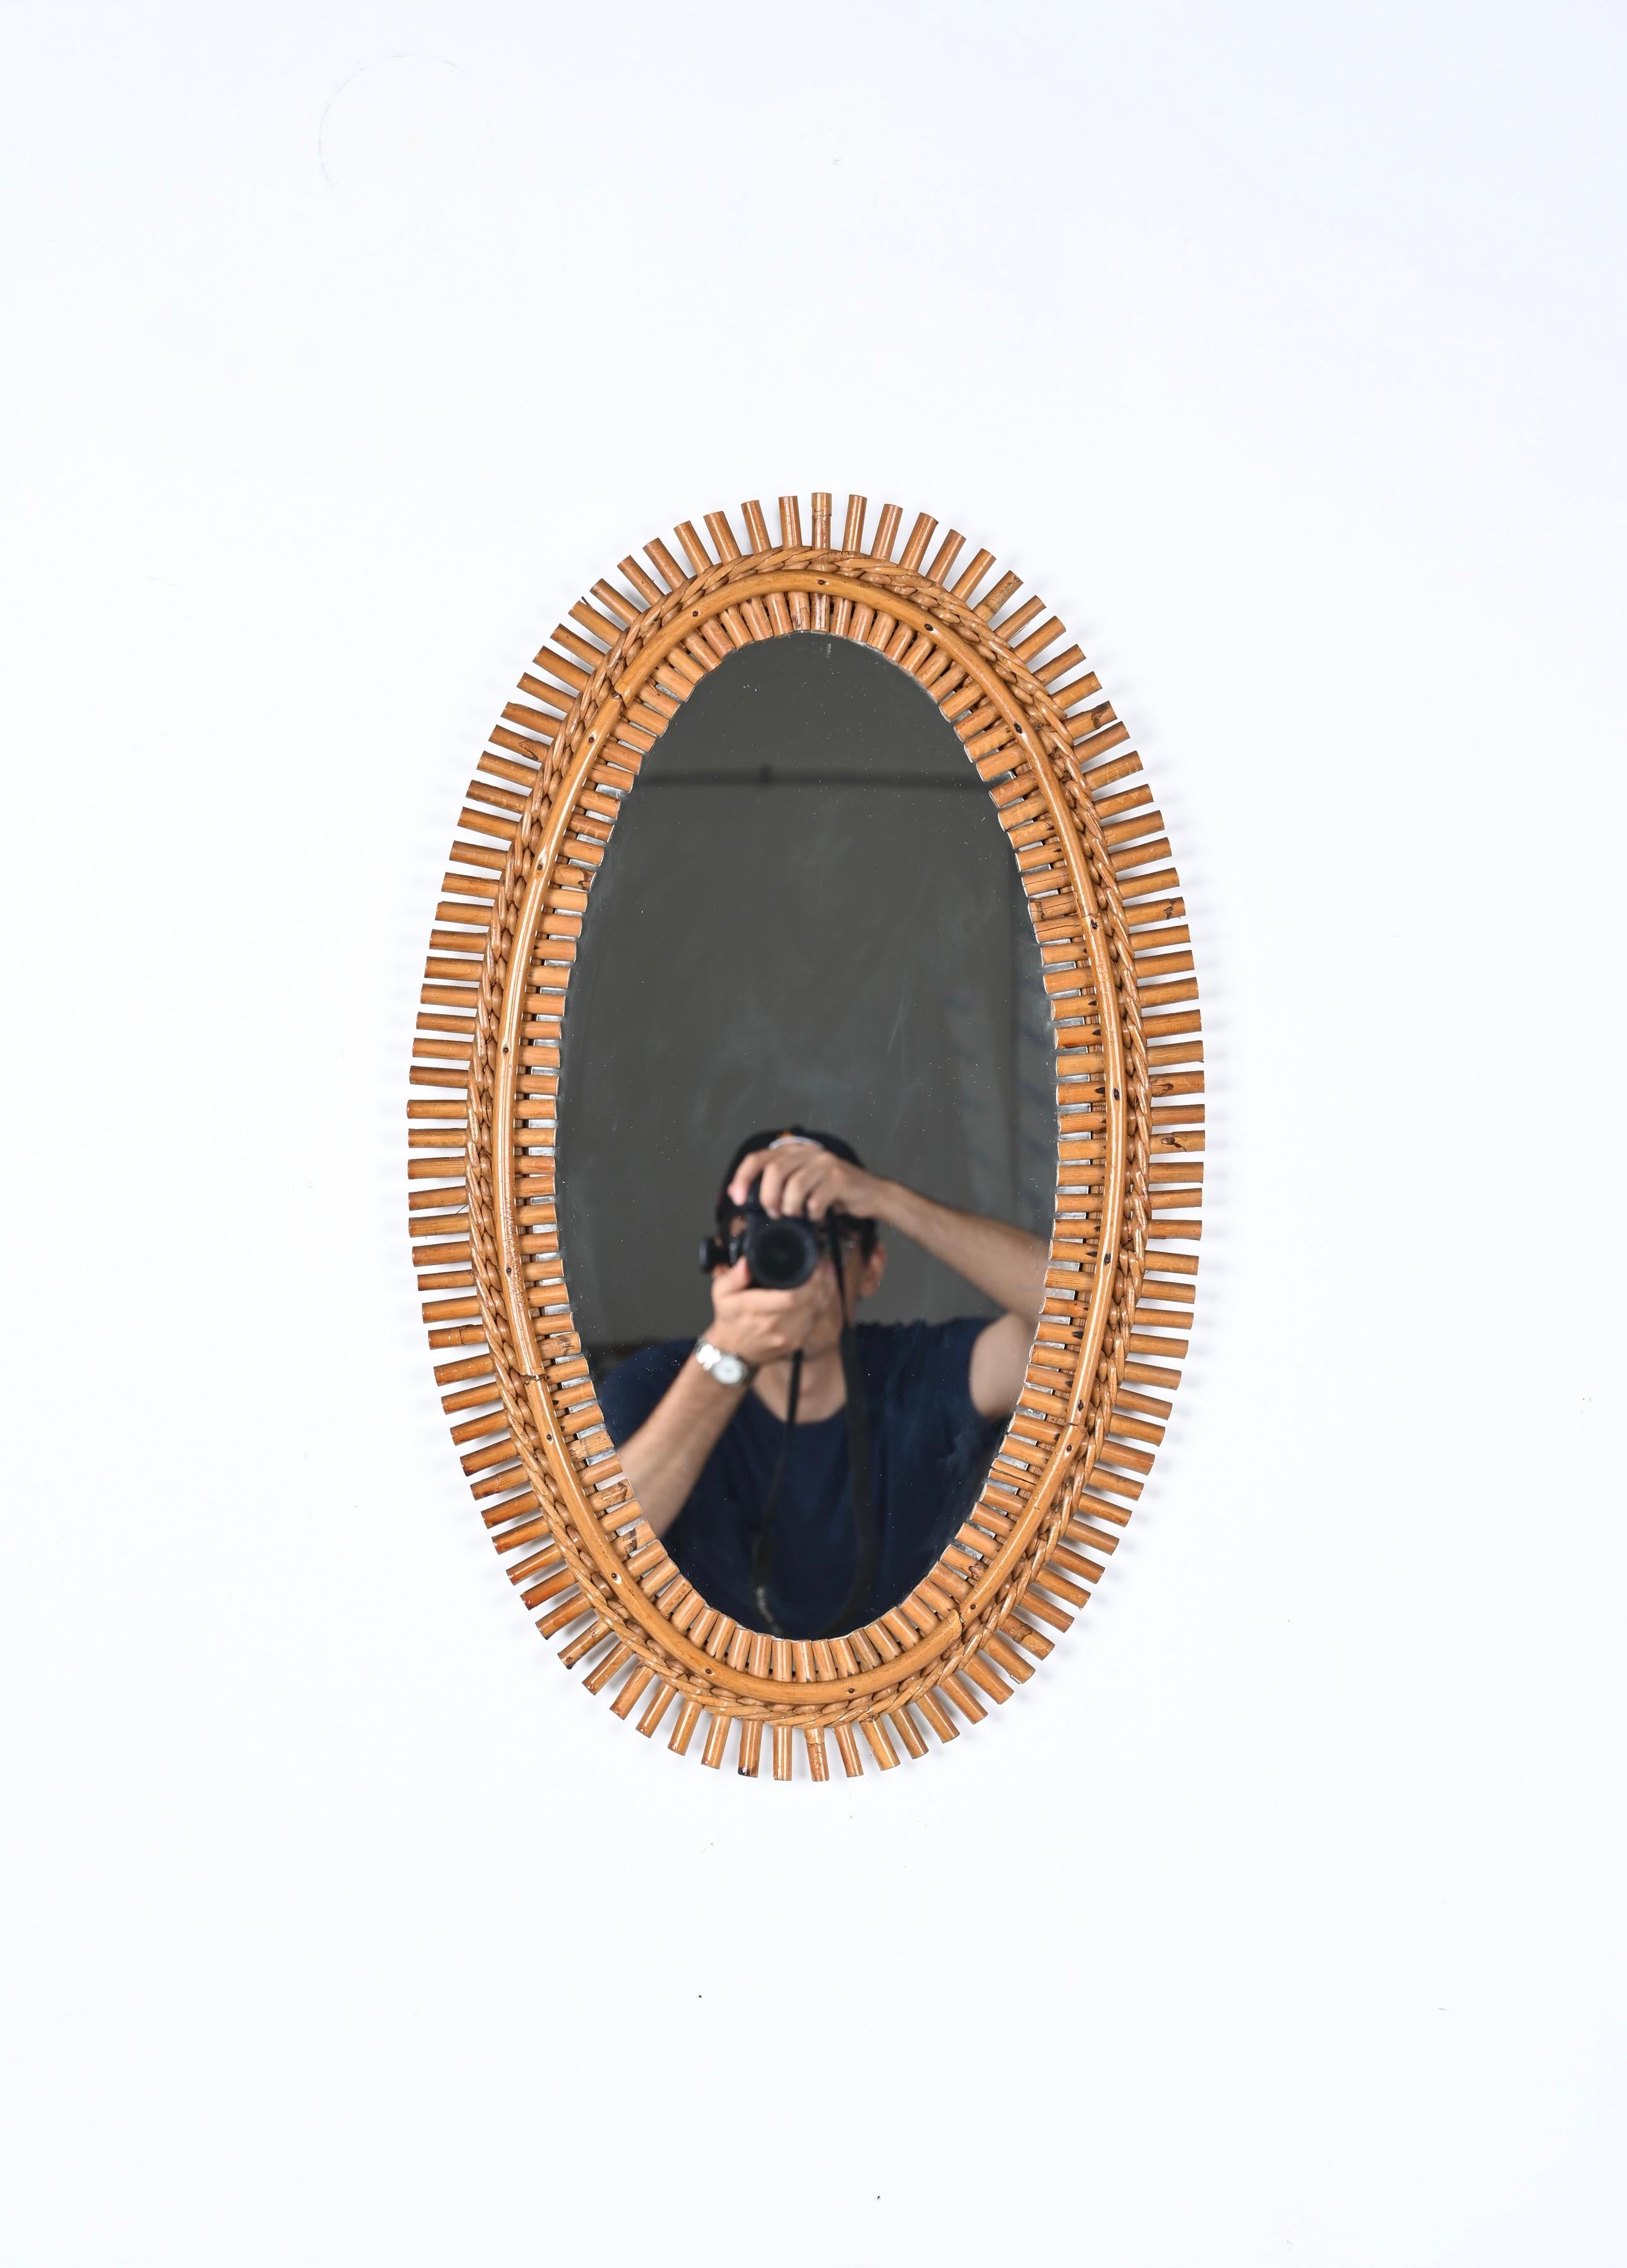 Gorgeous Cote d'Azur style oval mirror in bamboo, rattan and wicker, made in France in the 1960s. 

This lovely mirror features a double frame in curved rattan crossed by small bamboo inserts, the whole is kept together by a wonderful braid in